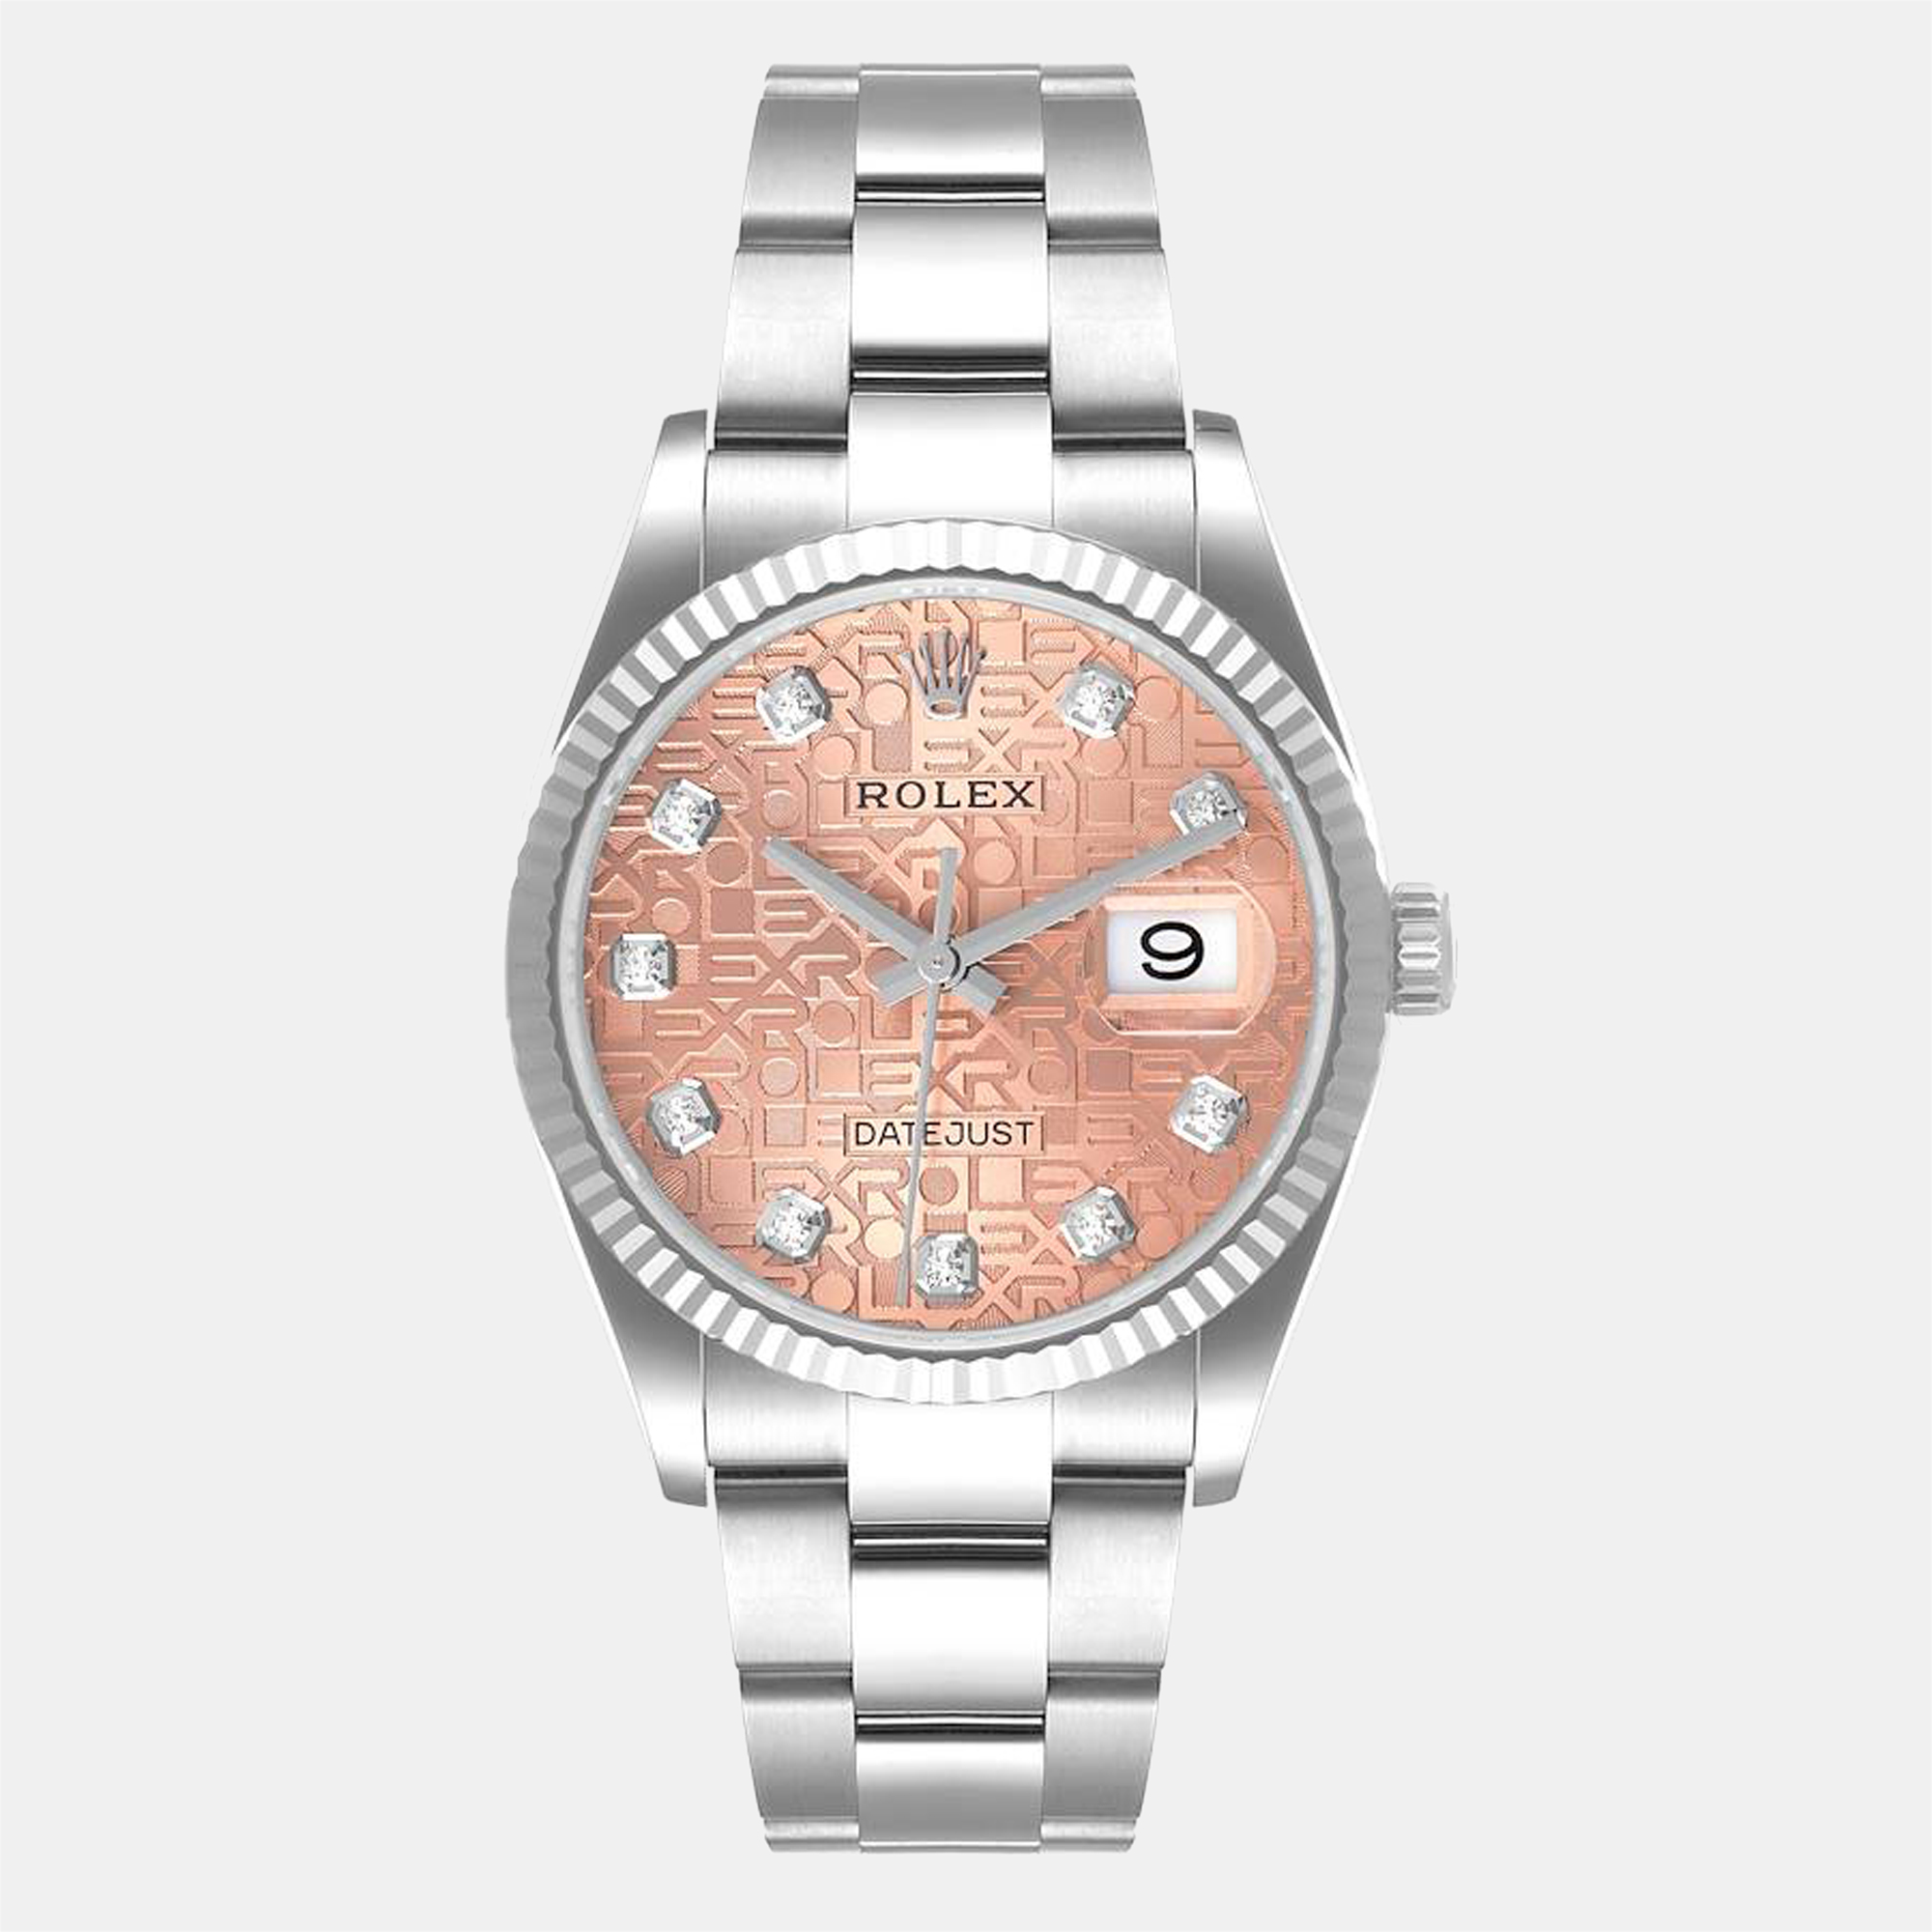 The Datejust is one of the most recognized and coveted watches from the house of Rolex. It has a distinct look and an irrefutable appeal. Crafted beautifully this authentic Rolex Datejust wristwatch has the signature allure and the promise of enduring quality.